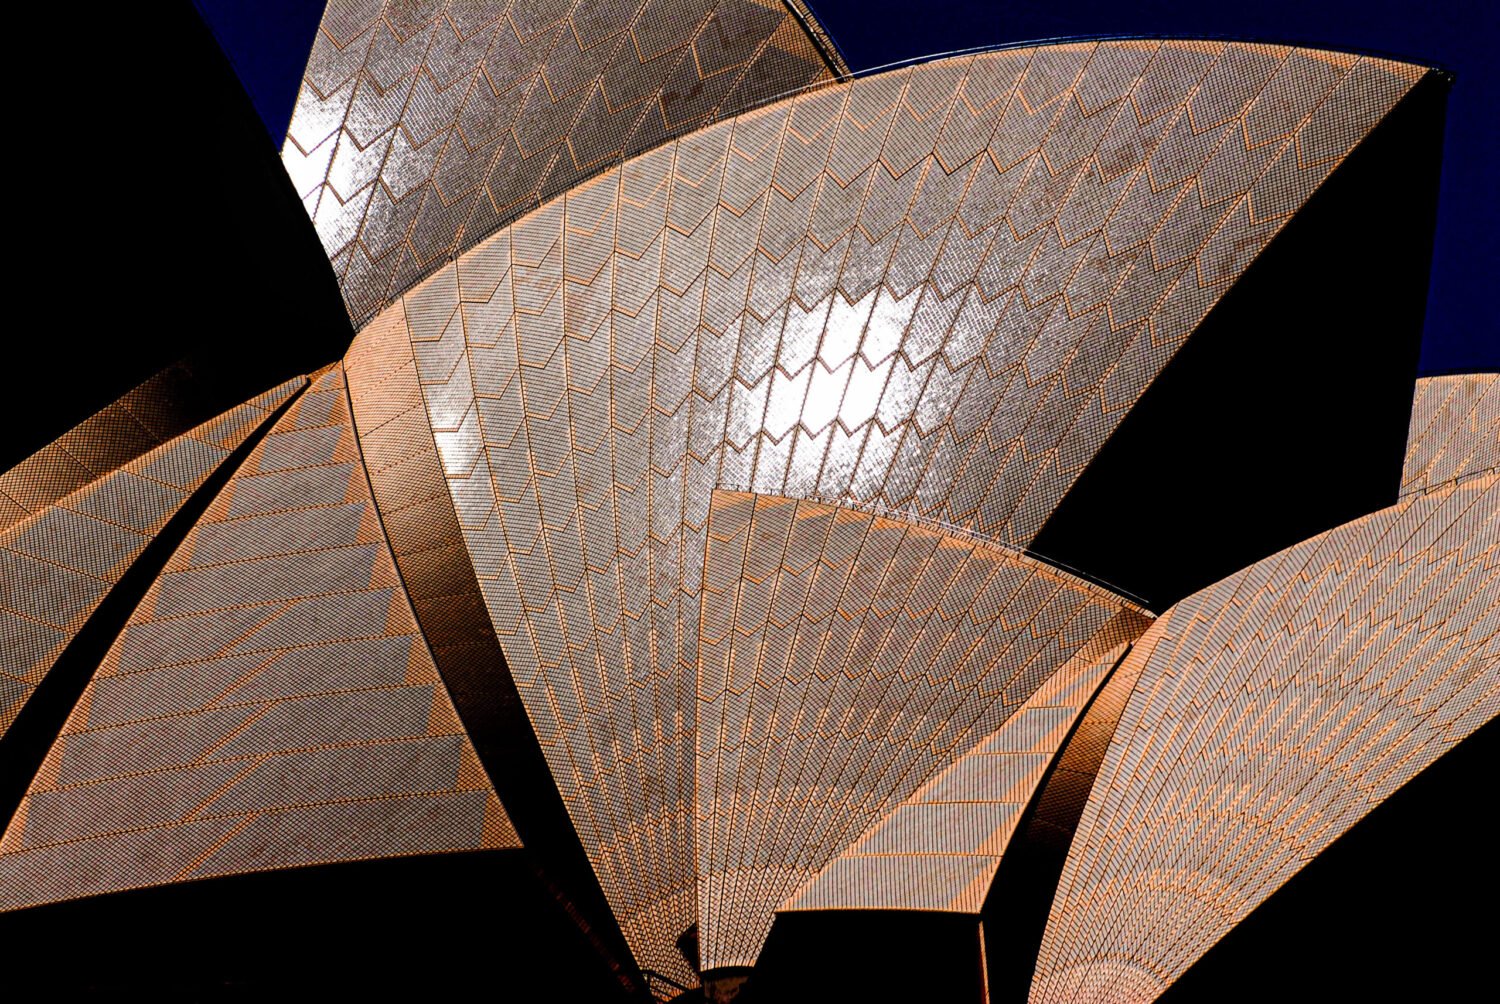 Close-up of the sydney opera house shells with intricate tile patterns against a blue sky.